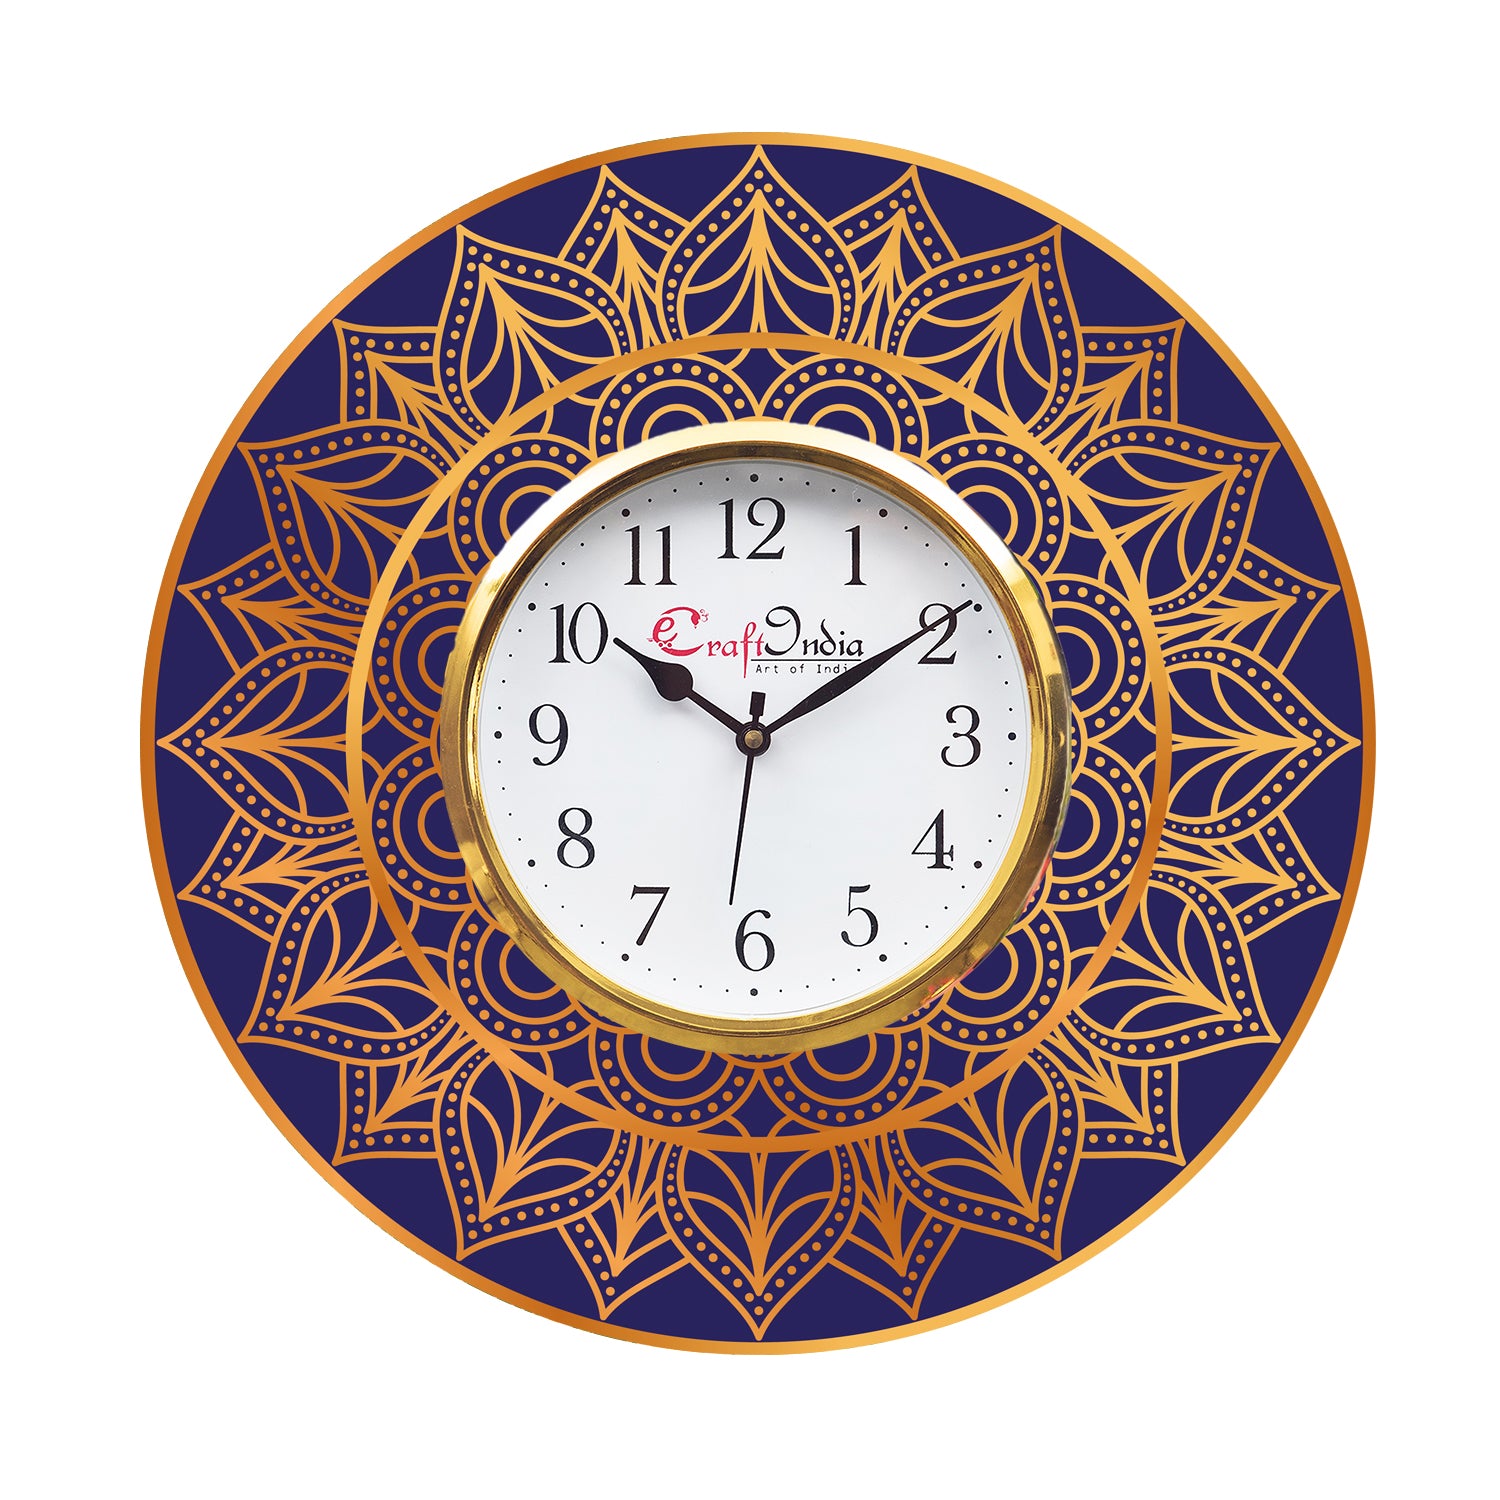 Ethnic Design Wooden Colorful Round Wall Clock